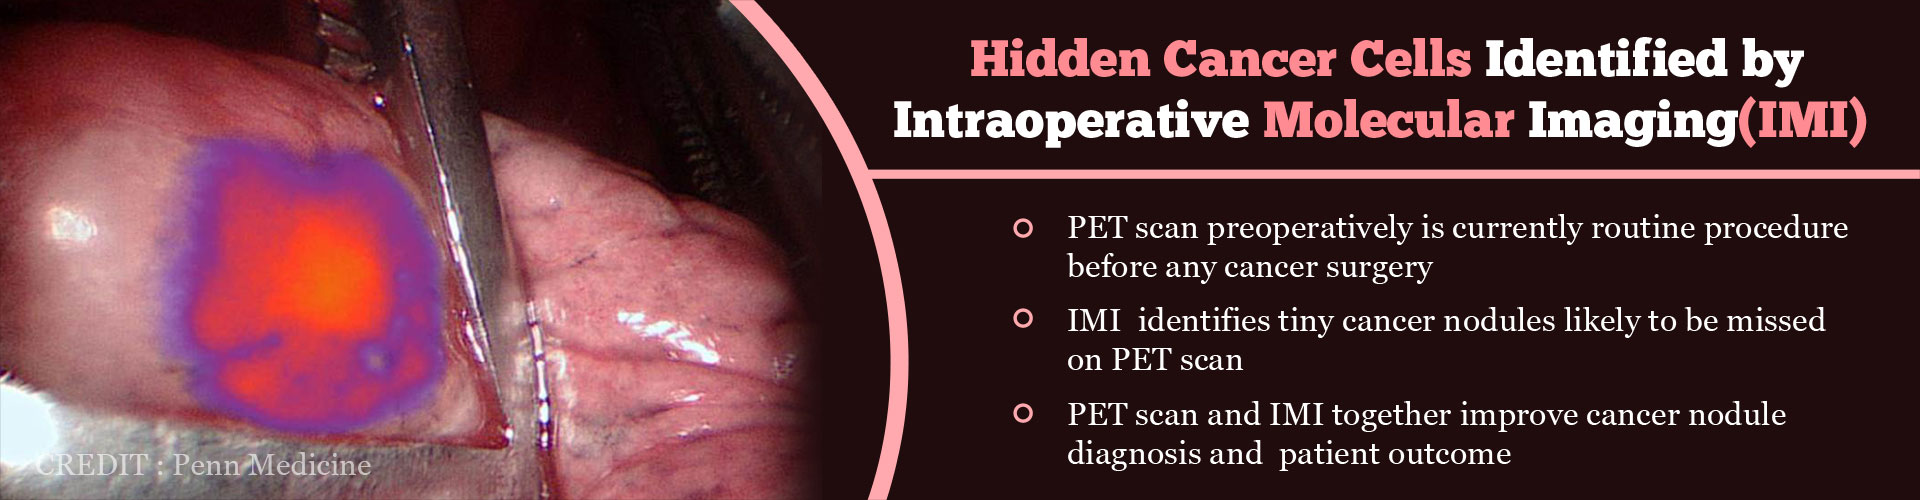 Hidden cancer cells identified by intraoperative molecular imaging (IMI)
- PET scan pre-operatively is currently routine procedure before any cancer surgery
- IMI identifies tiny cancer nodules likely to be missed on PET scan
- PET scan and IMI together improve cancer nodule diagnosis and patient outcome